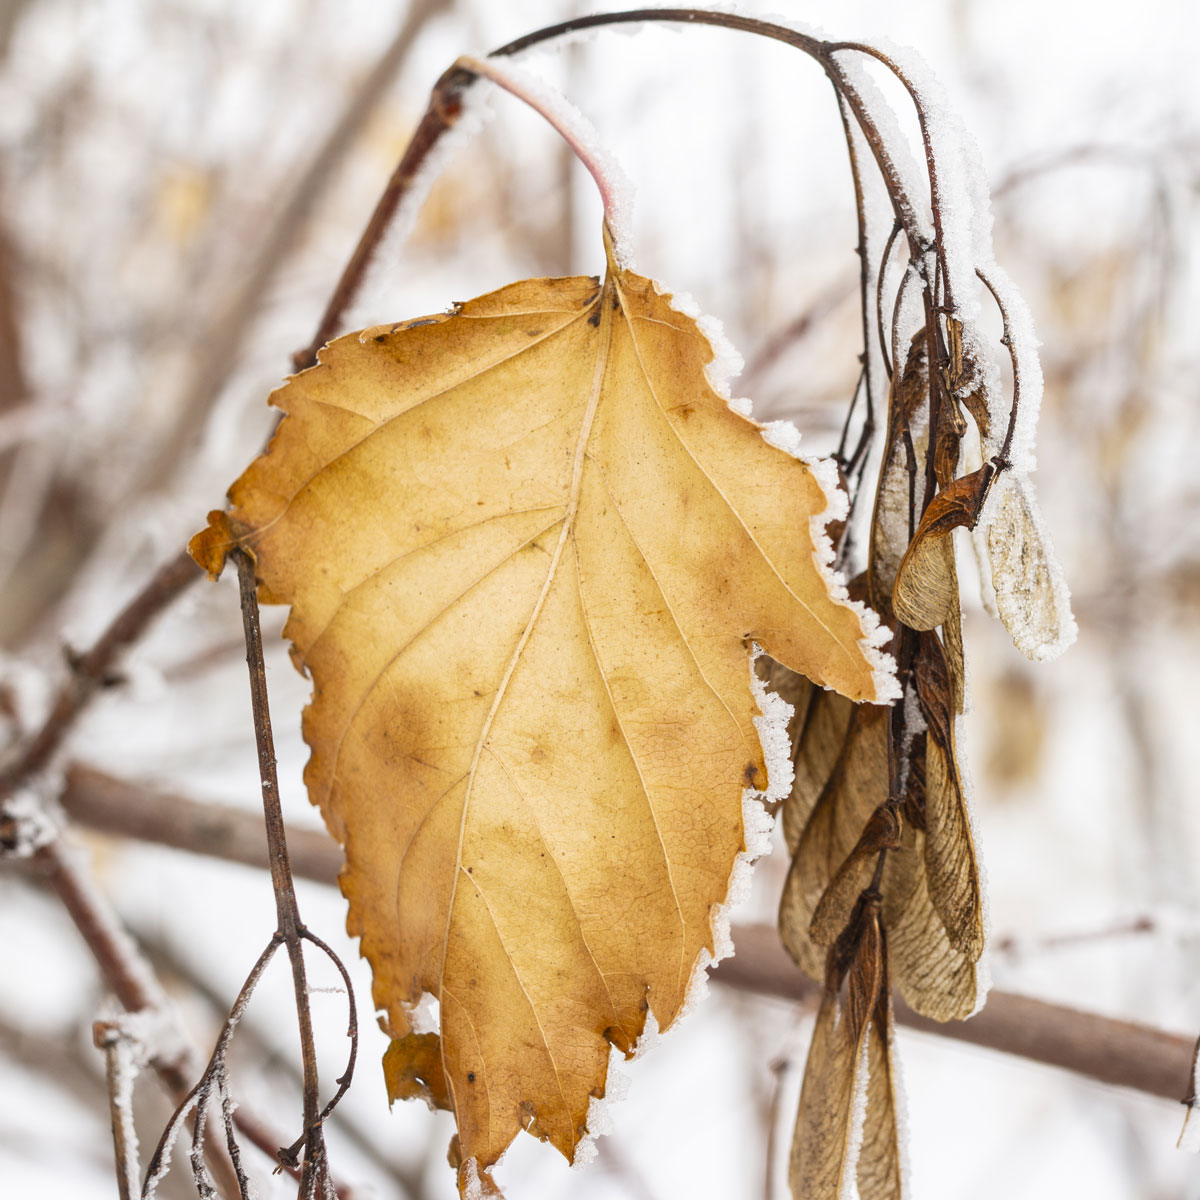 A golden colored leaf fringed in frost hangs from a limb surrounded by fresh snow.